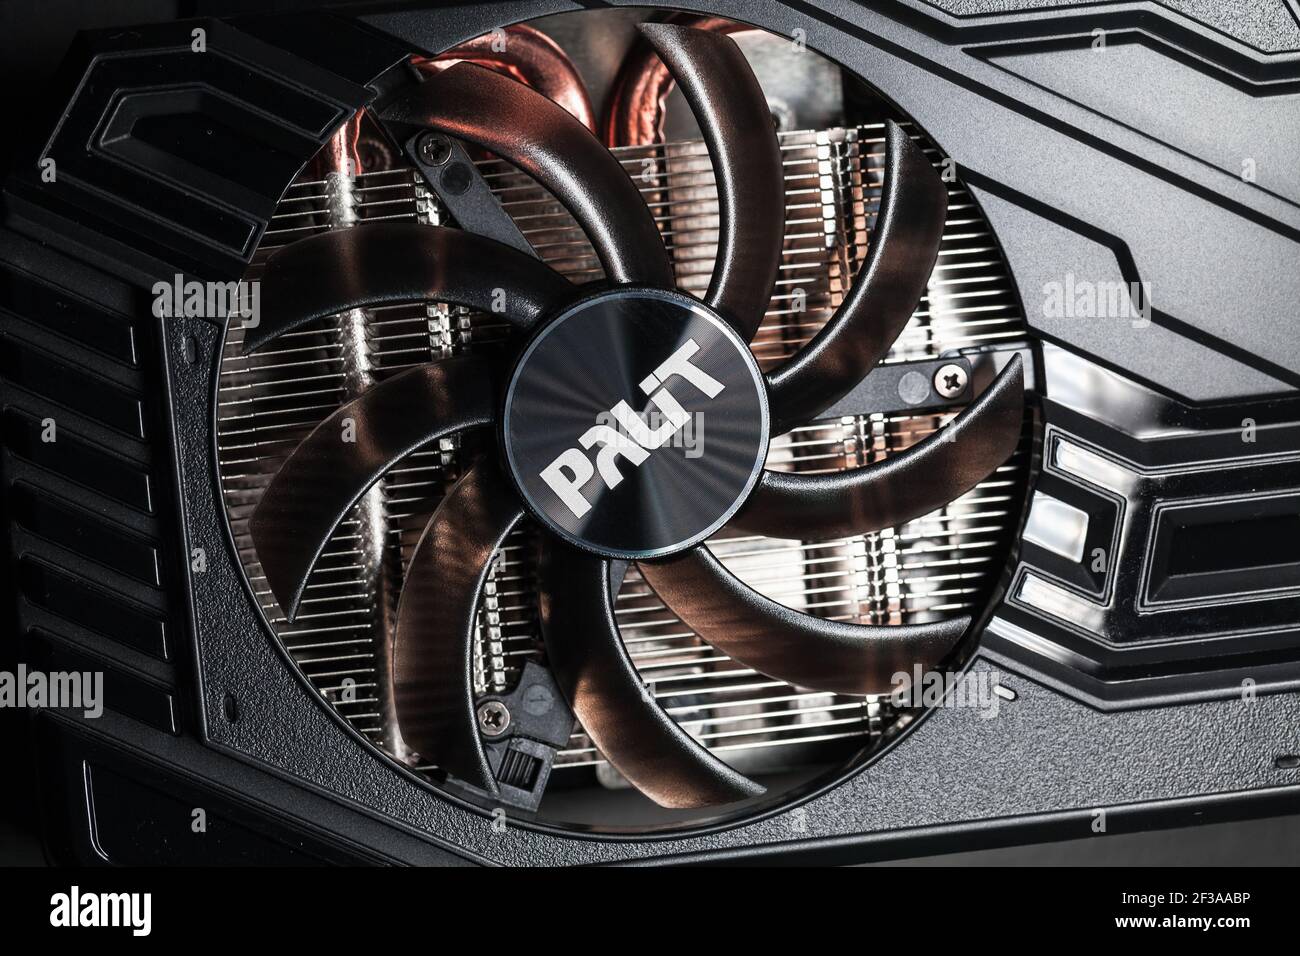 St.Petersburg, Russia - February 2, 2021: Palit GPU cooler, close-up photo. This fan is mounted on a video card to cool the GPU and surrounding compon Stock Photo